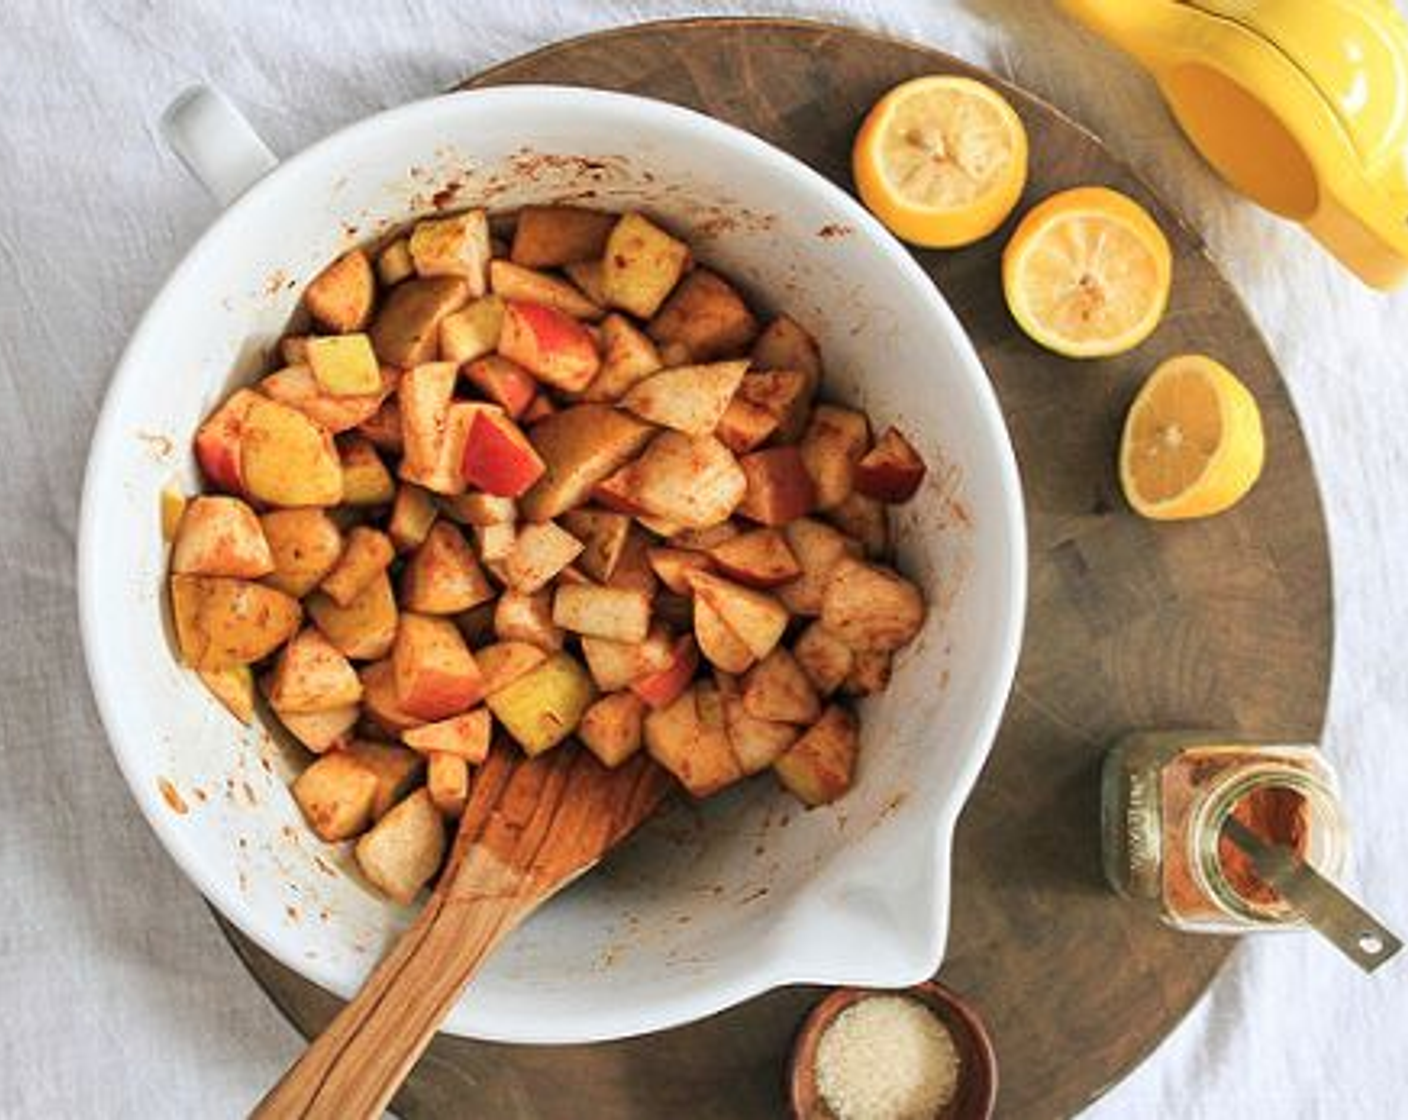 step 2 In a large bowl (or right in your baking dish), combine Apples (3), Pears (3), the juice from Lemon (1), Coconut Sugar (1 Tbsp), and Ground Cinnamon (1 tsp).